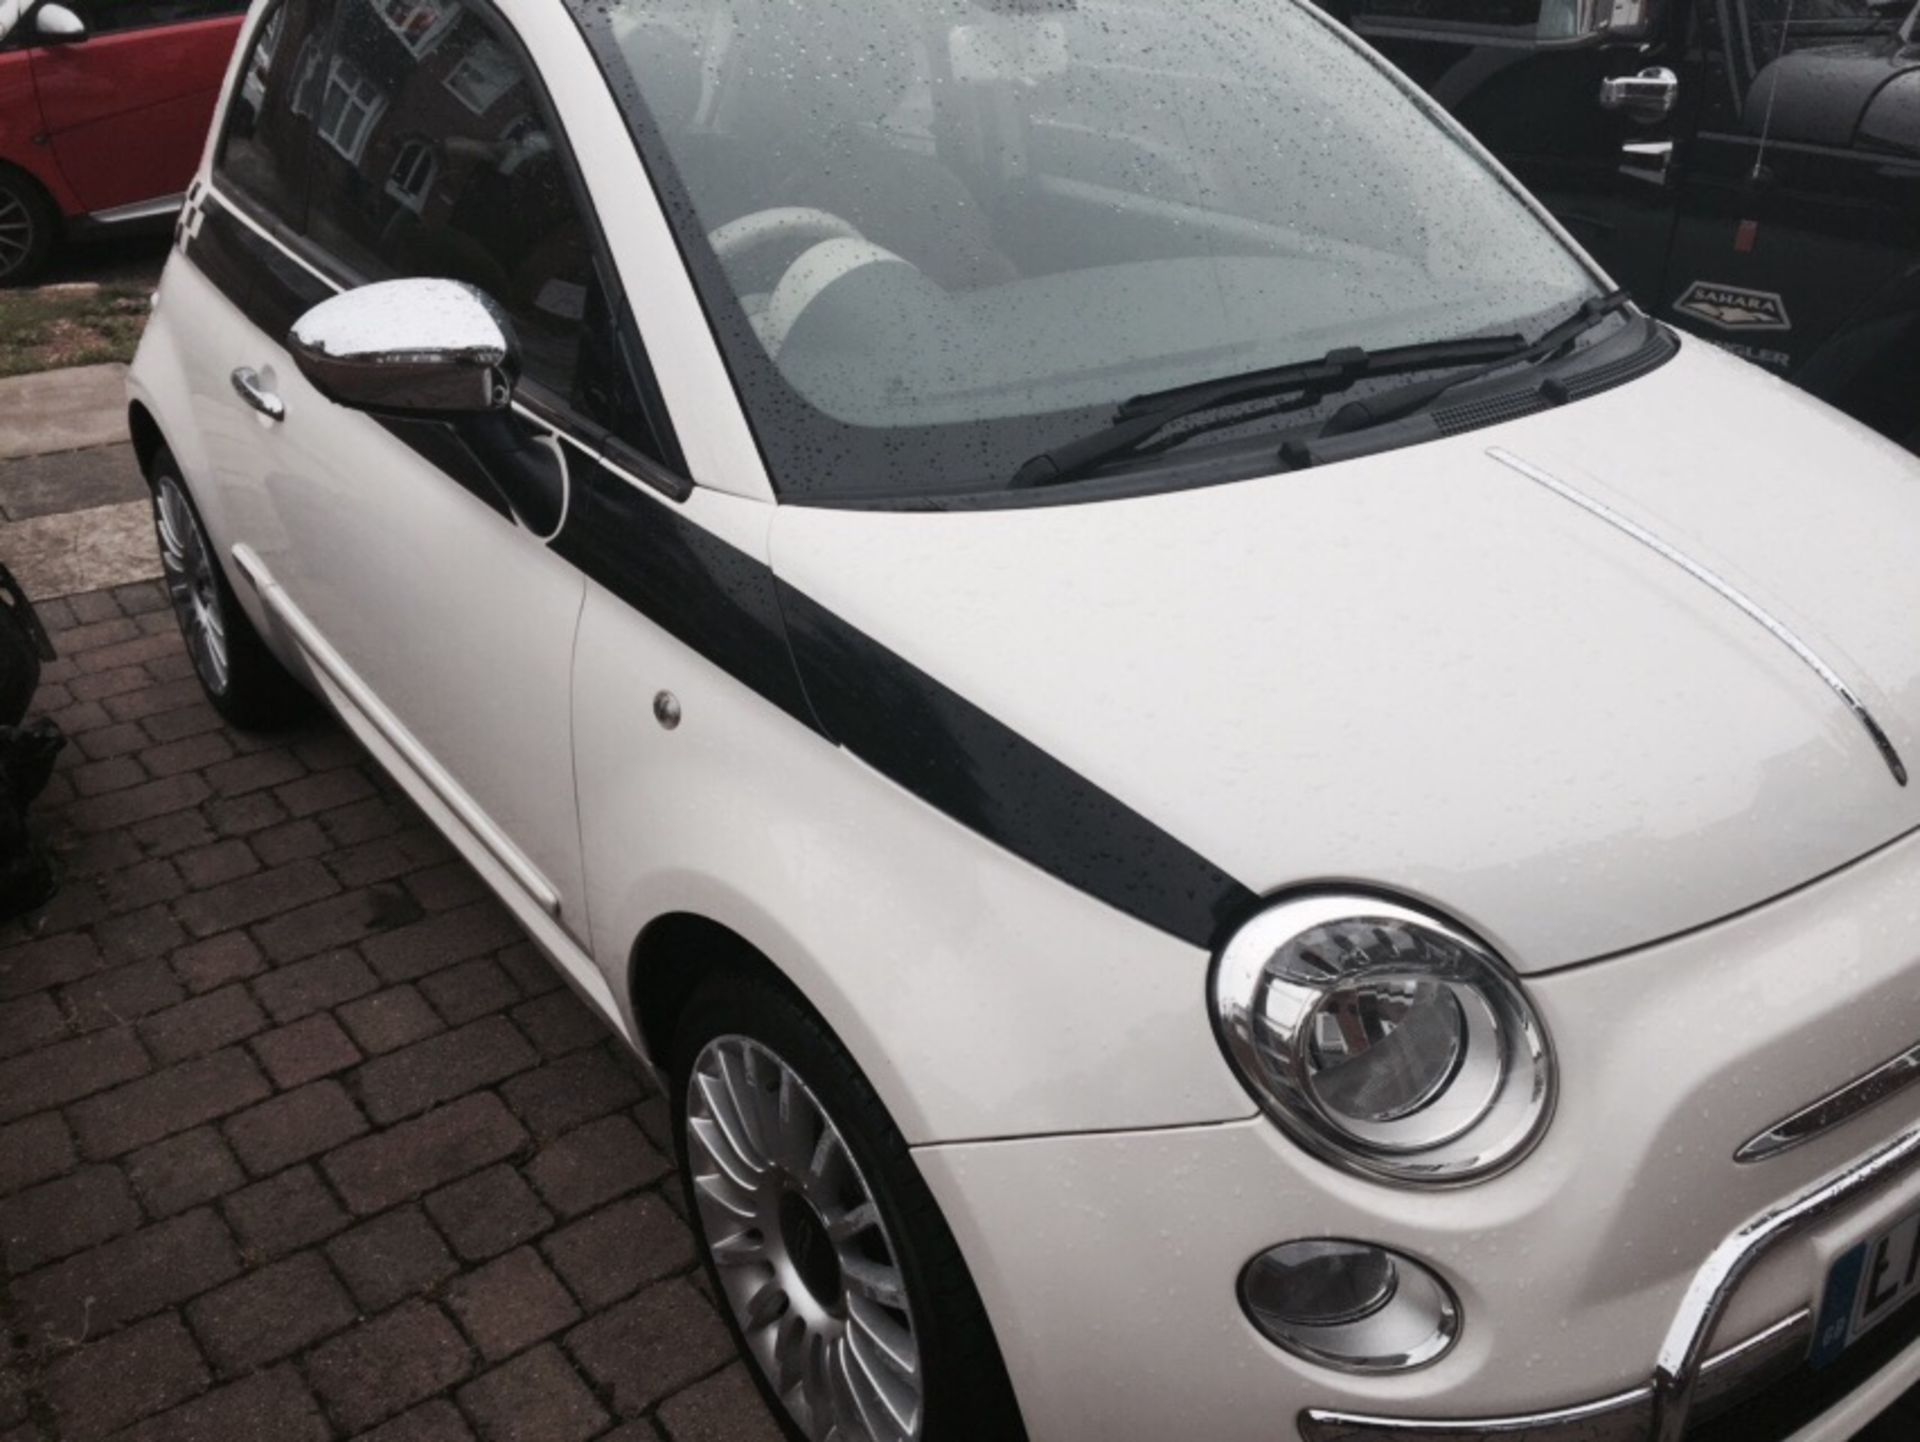 58 Plate Fiat 500 Lounge 3 Door Hatchback - White - Features Premium Extras - NO VAT on the Hammer - - Image 23 of 33